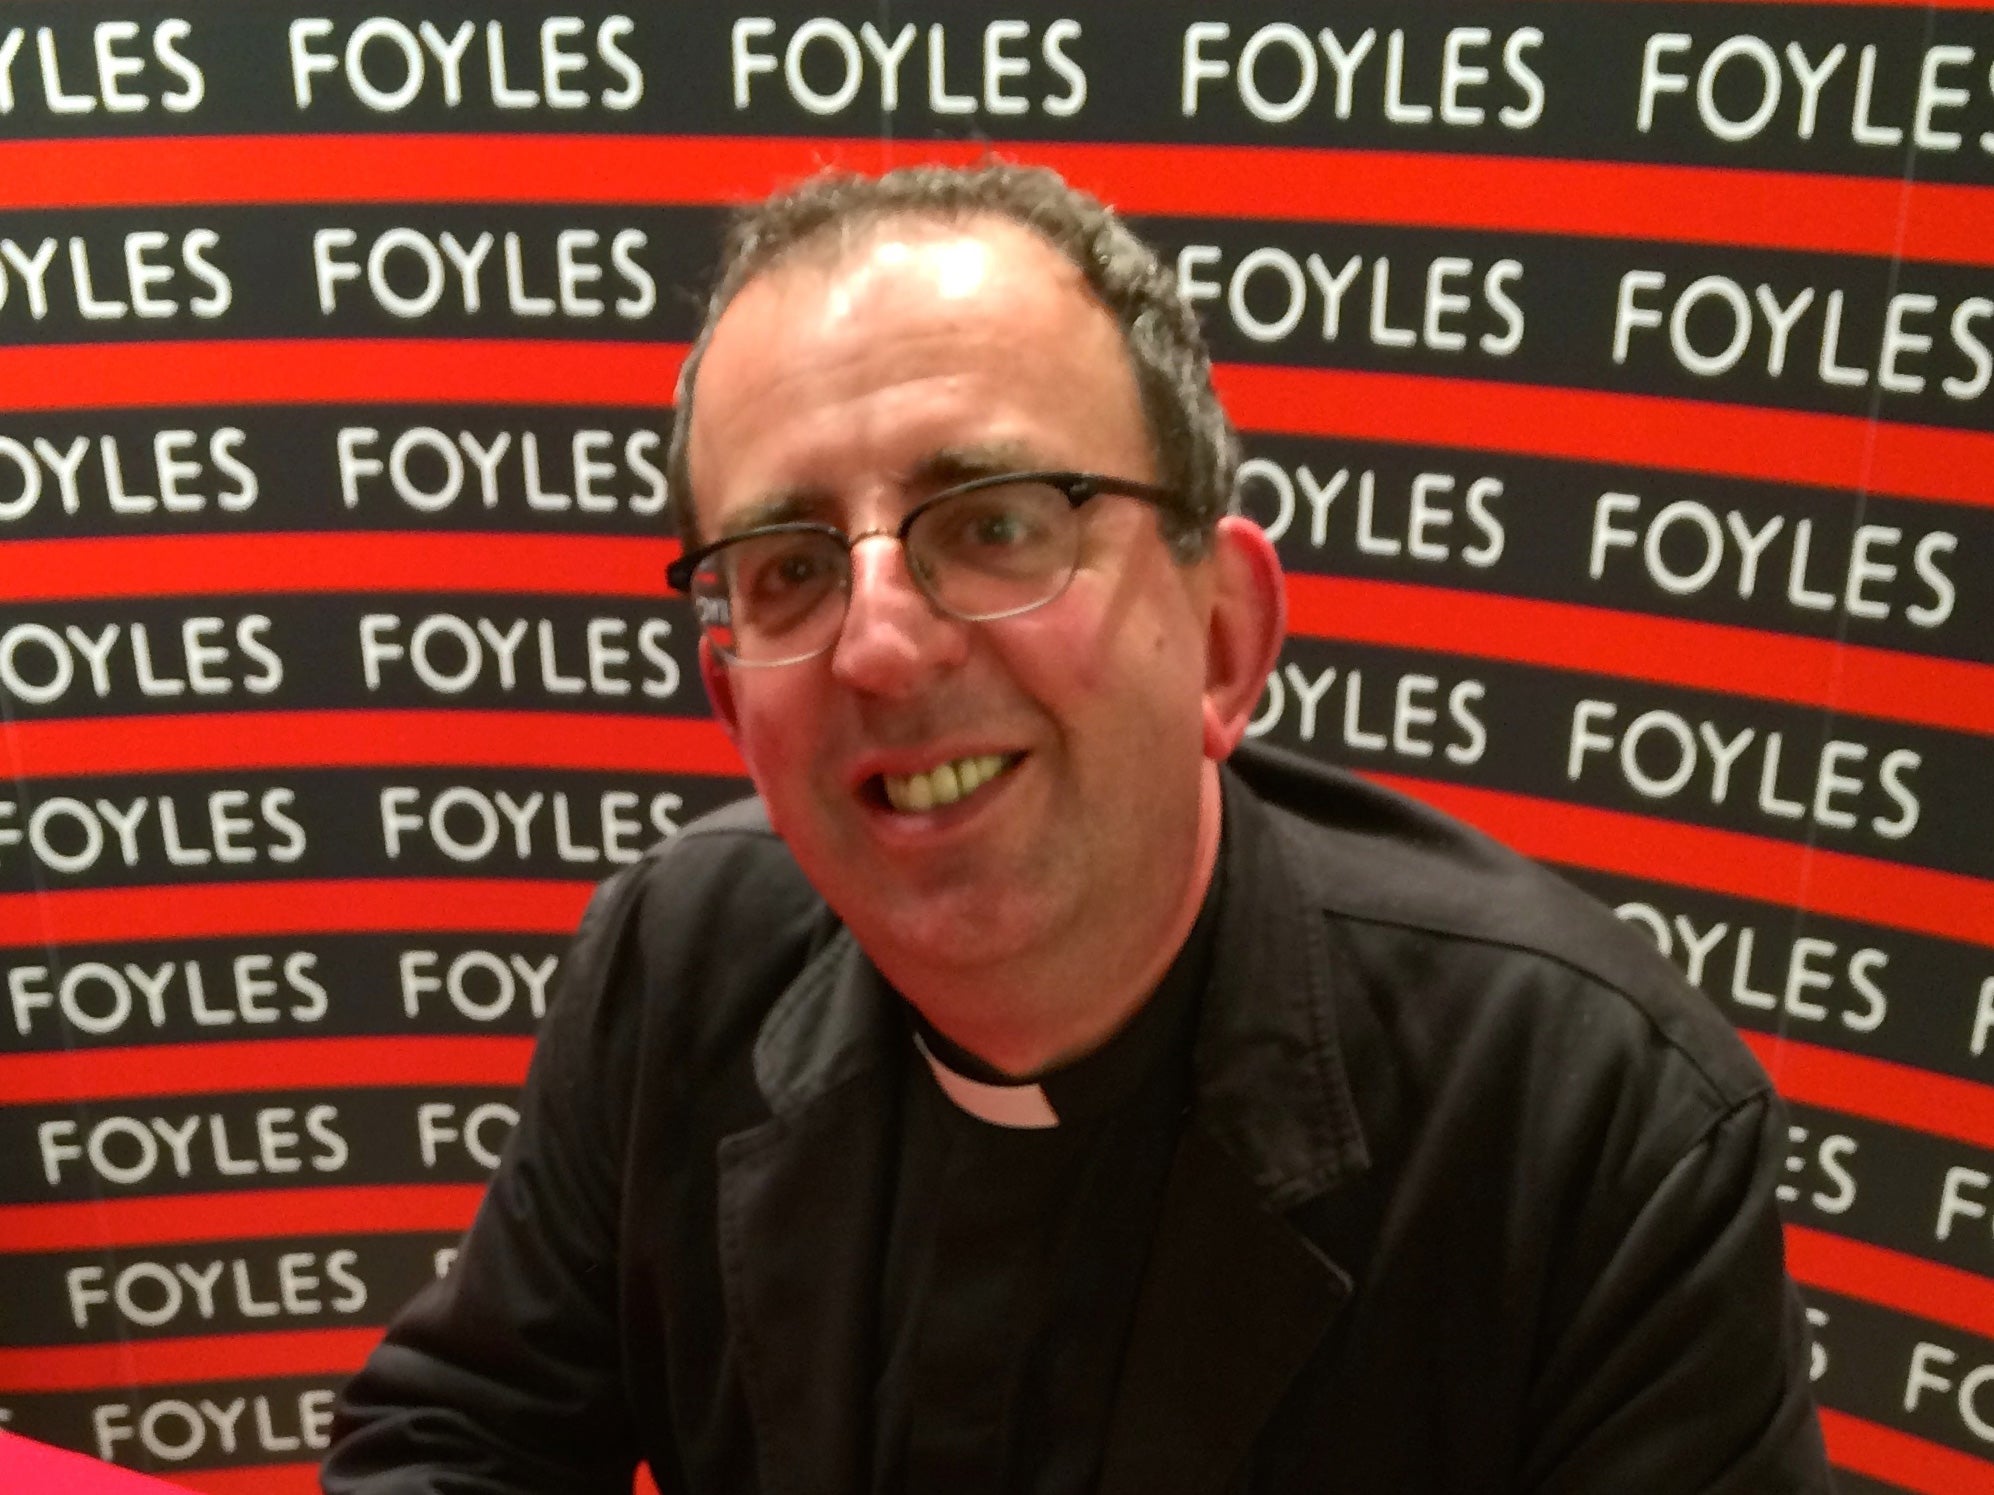 The Reverend Richard Coles at a book signing